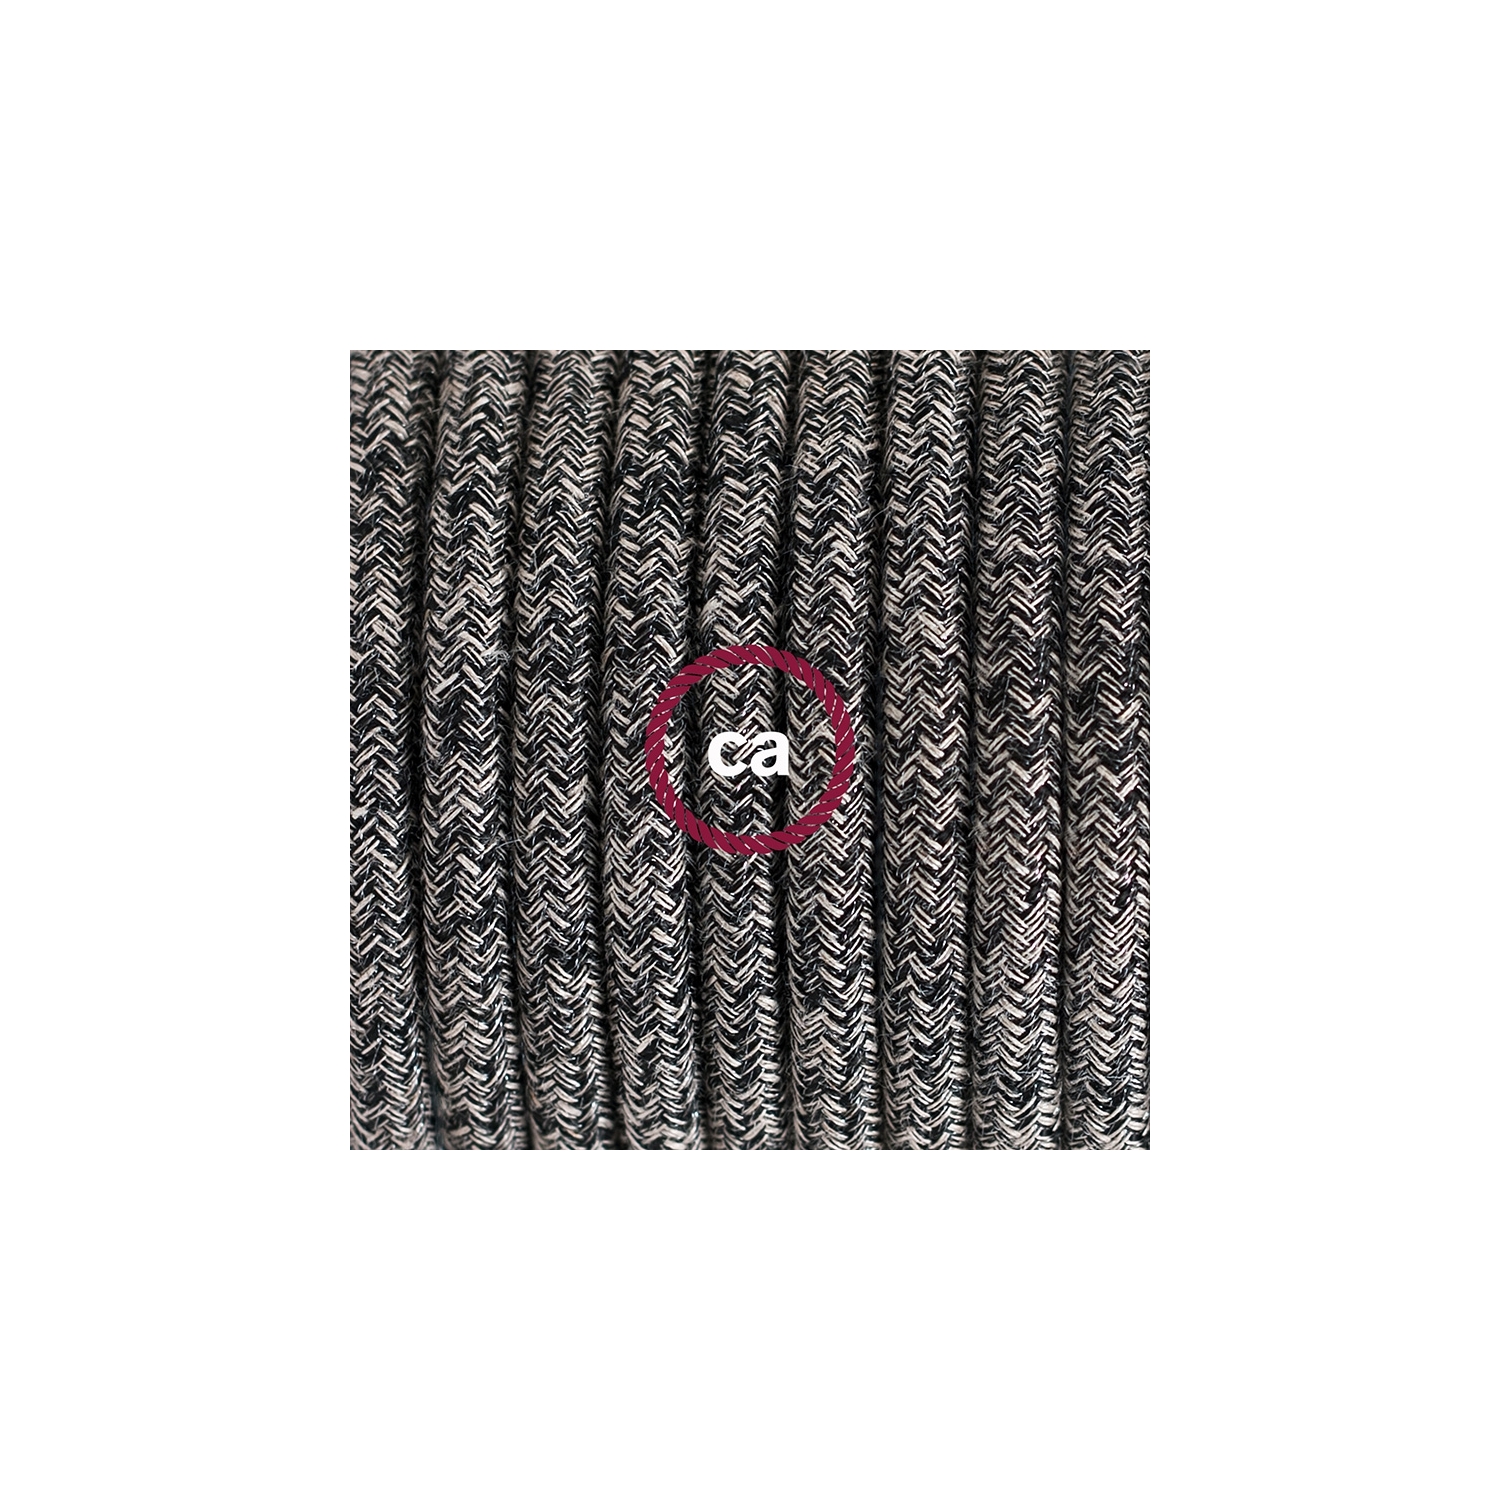 Plug-in Pendant with switch on socket | RS81 Black Glitter Cotton & Natural Linen Tweed